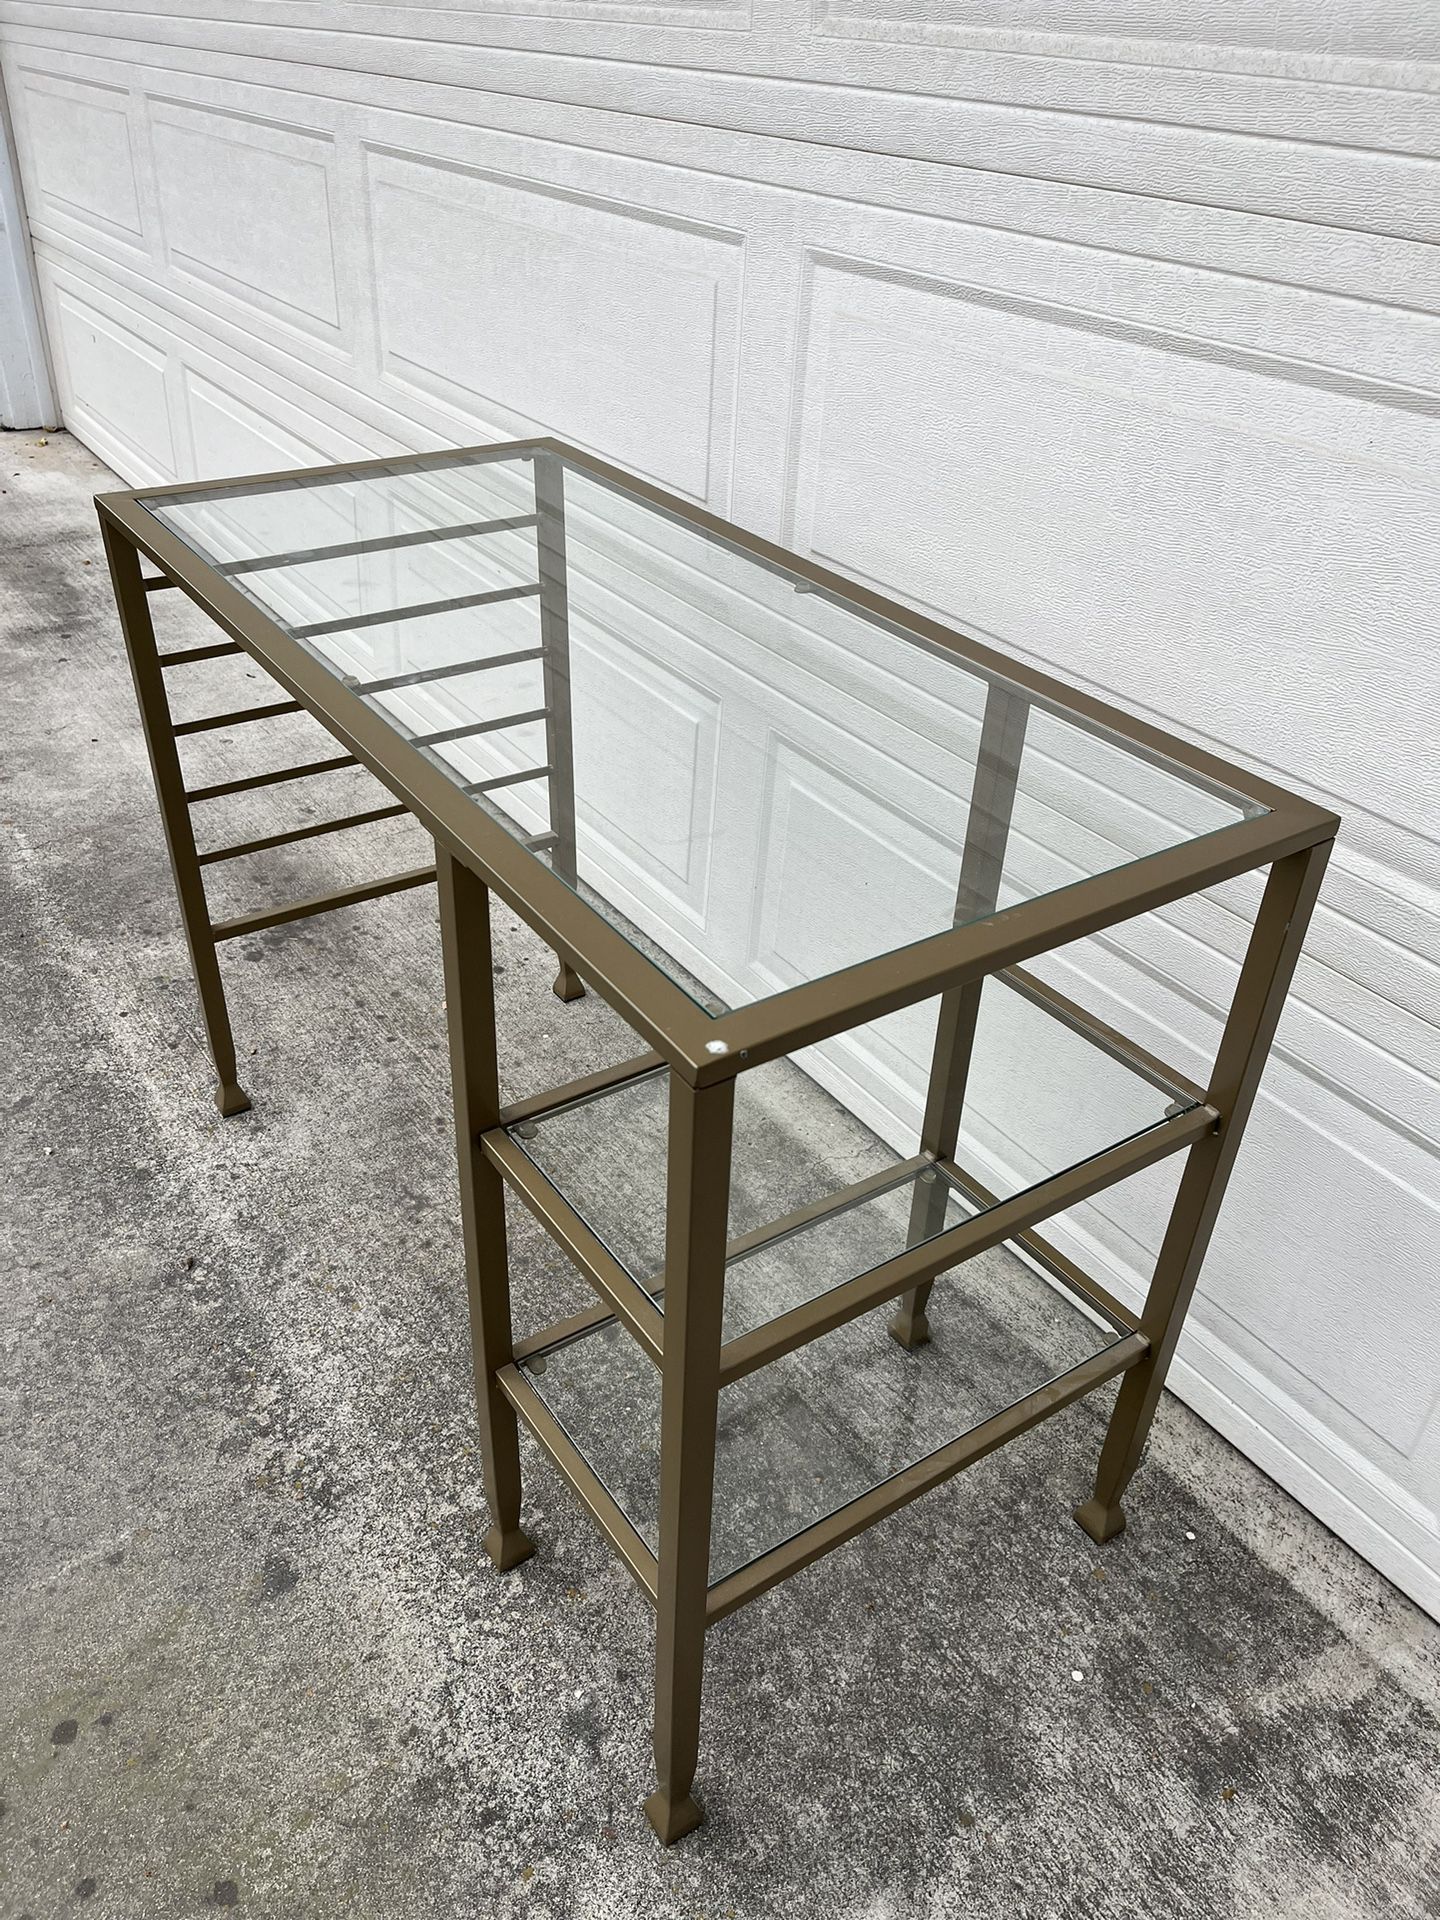 GOLD METAL & GLASS TABLE w/2 SHELVES 